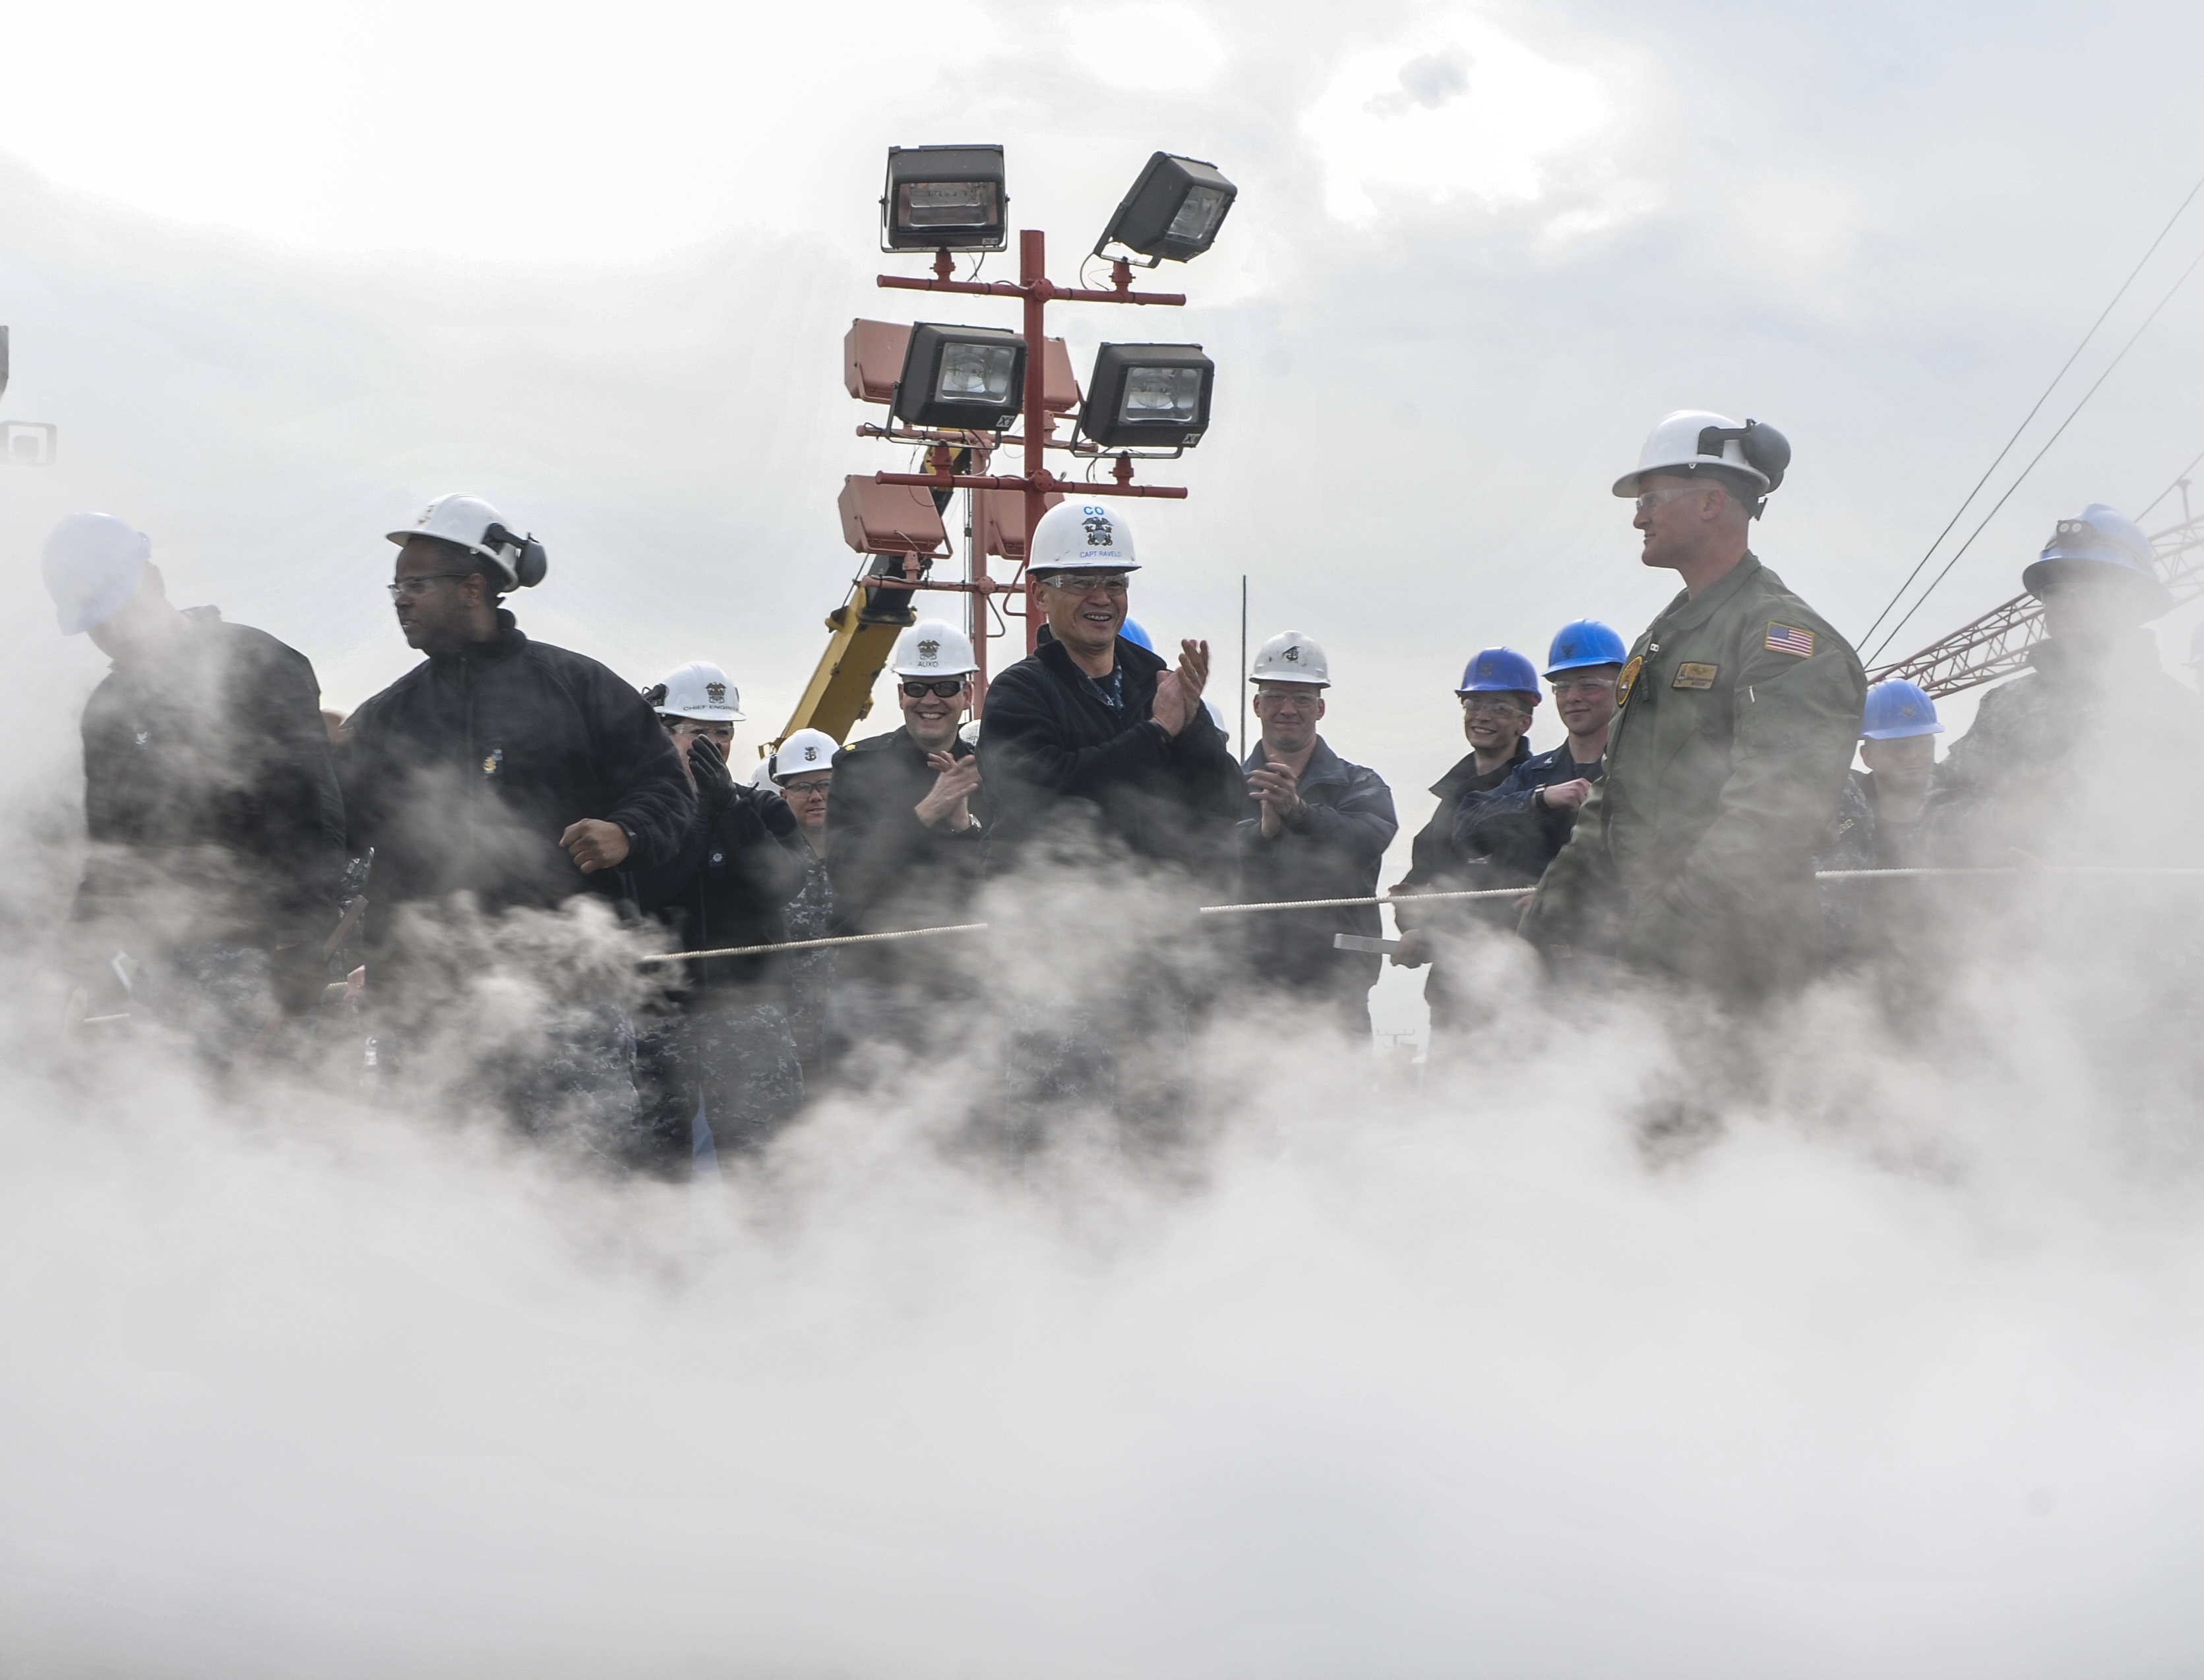 Capt. Ron Ravelo, Commanding Officer of Nimitz-class aircraft carrier USS Abraham Lincoln (CVN 72), cheers along with his Sailors after the successful testing of Lincoln’s catapult on the flight deck on Jan. 28, 2016. Lincoln is currently undergoing a Refueling and Complex Overhaul (RCOH) at Newport News Shipbuilding. US Navy photo.